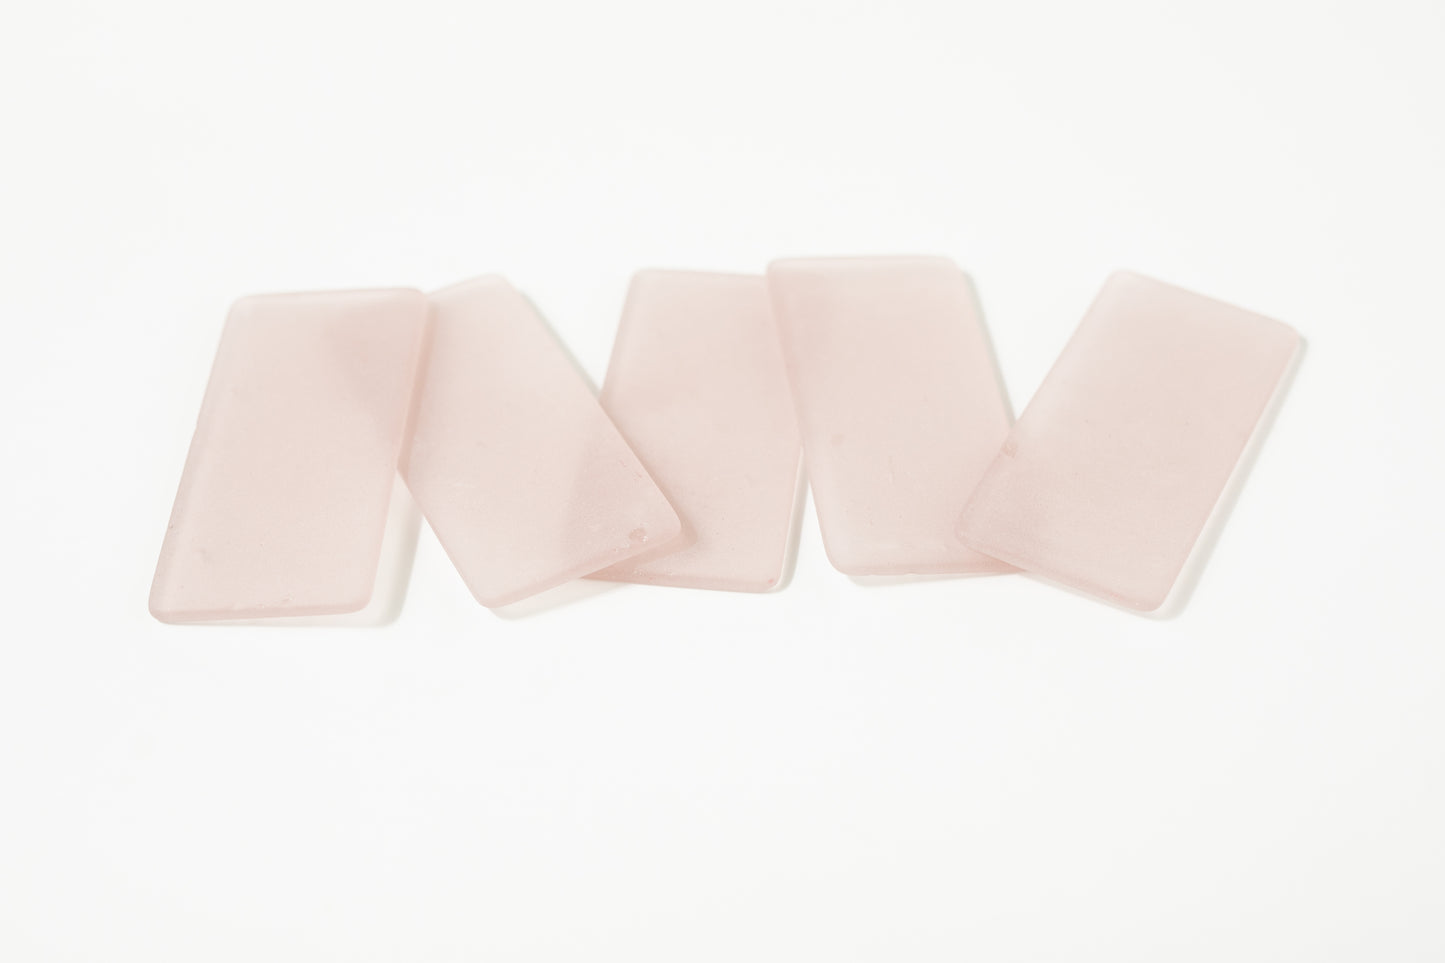 Dusty rose sea glass place cards - Set of 20 tumbled glass tiles